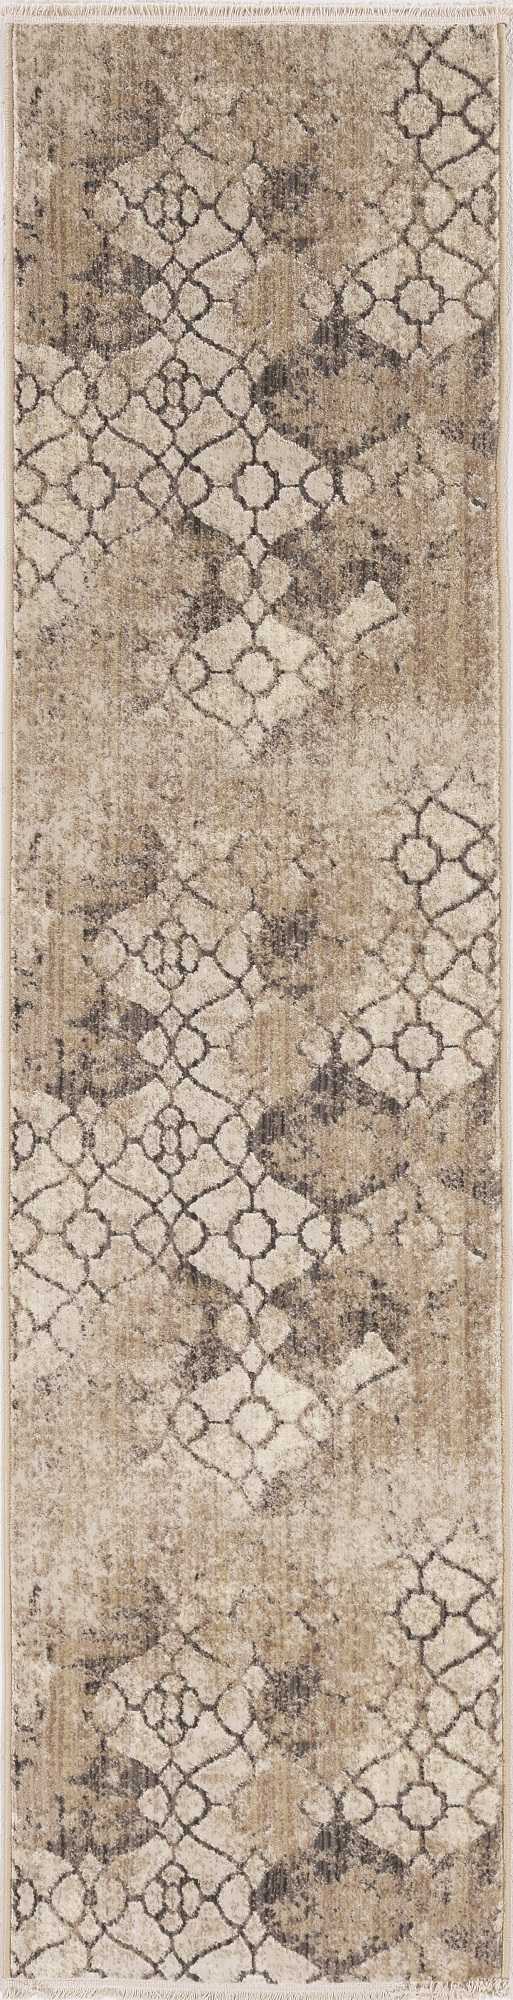 Cheap Rugs For Sale - 108" X 144" X 0.'5" Ivory Polypropylene Rug